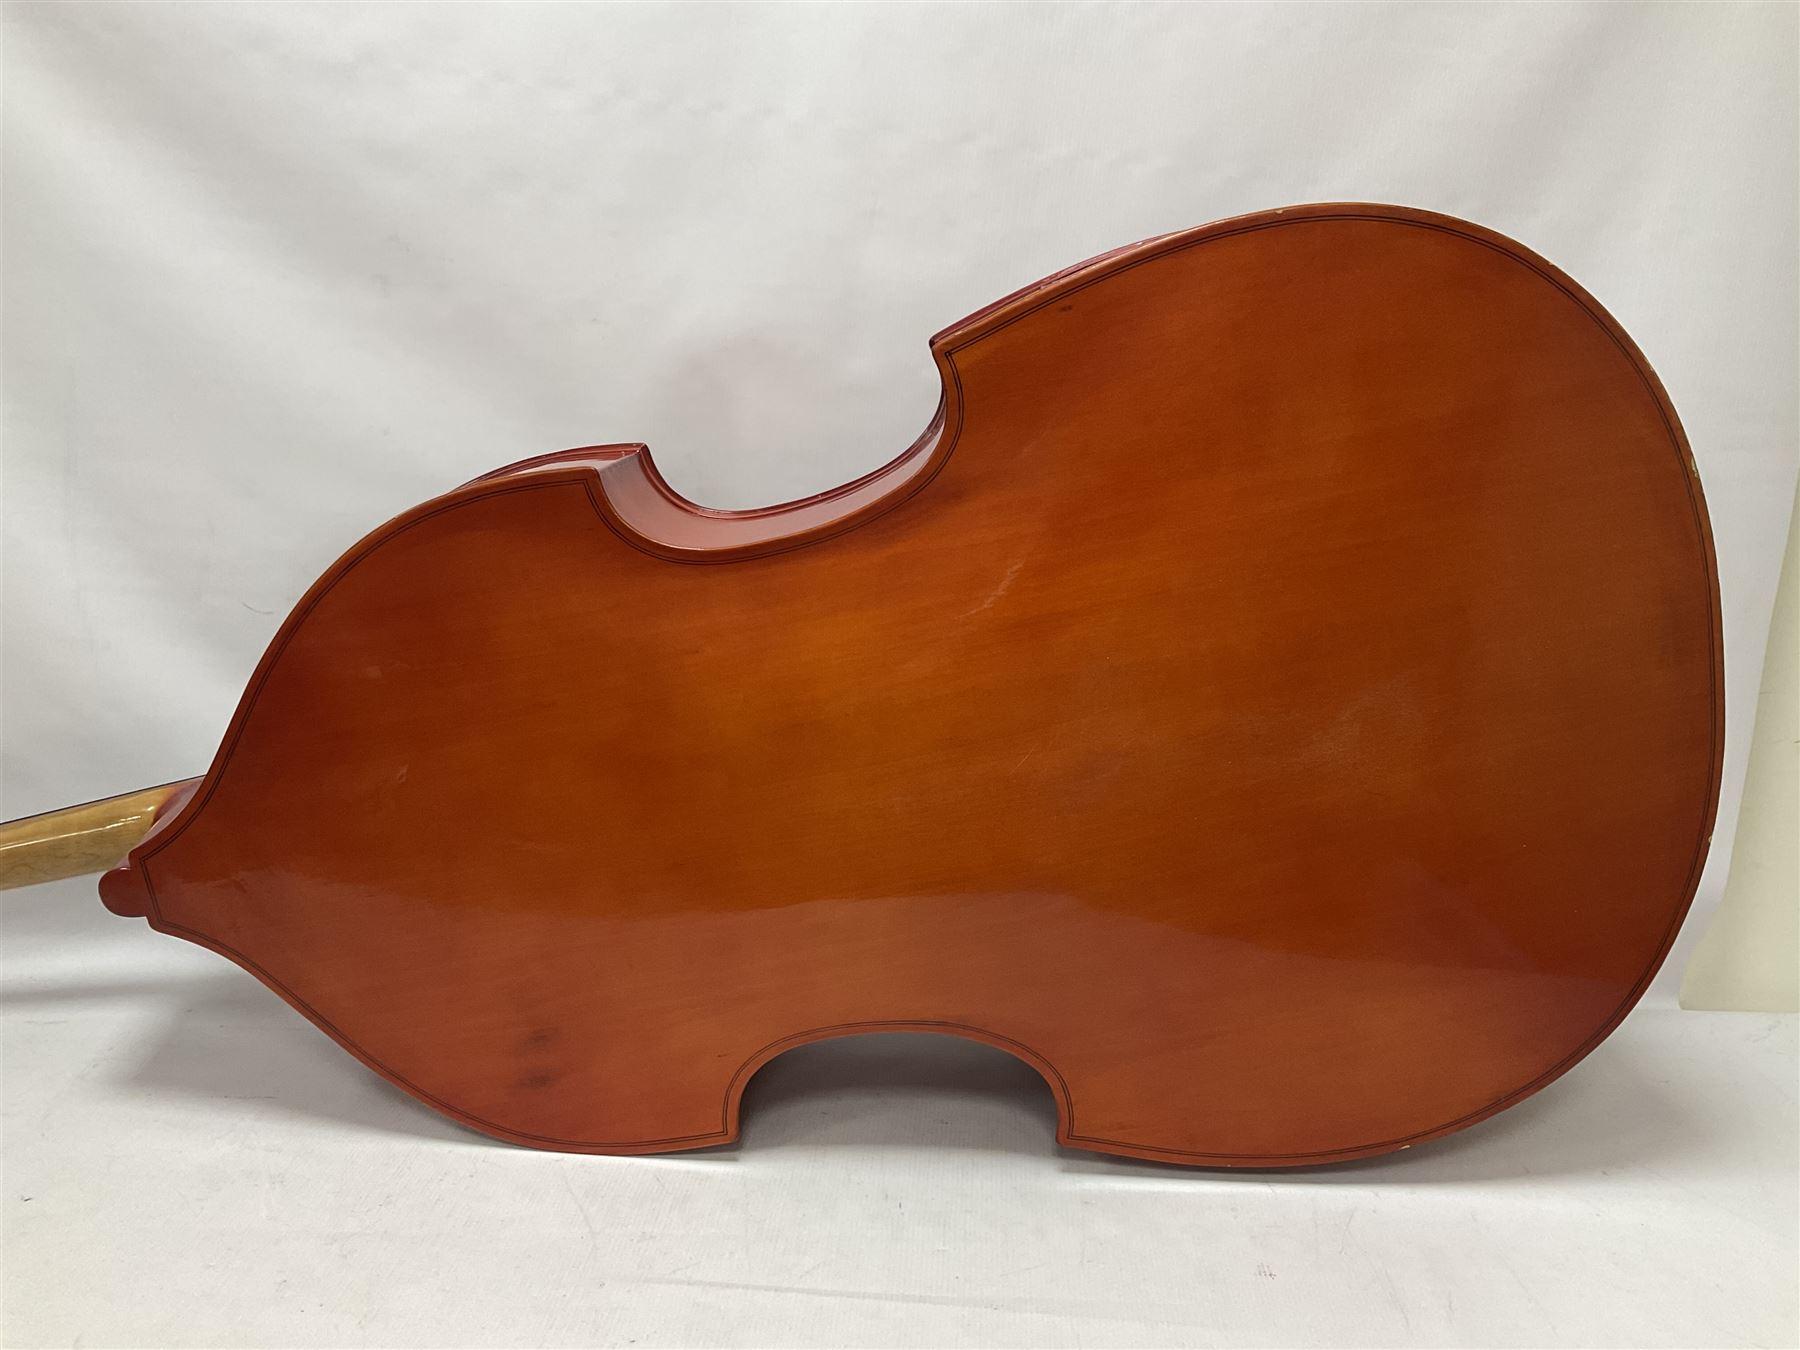 Contemporary 3/4 Double Bass - Image 9 of 18